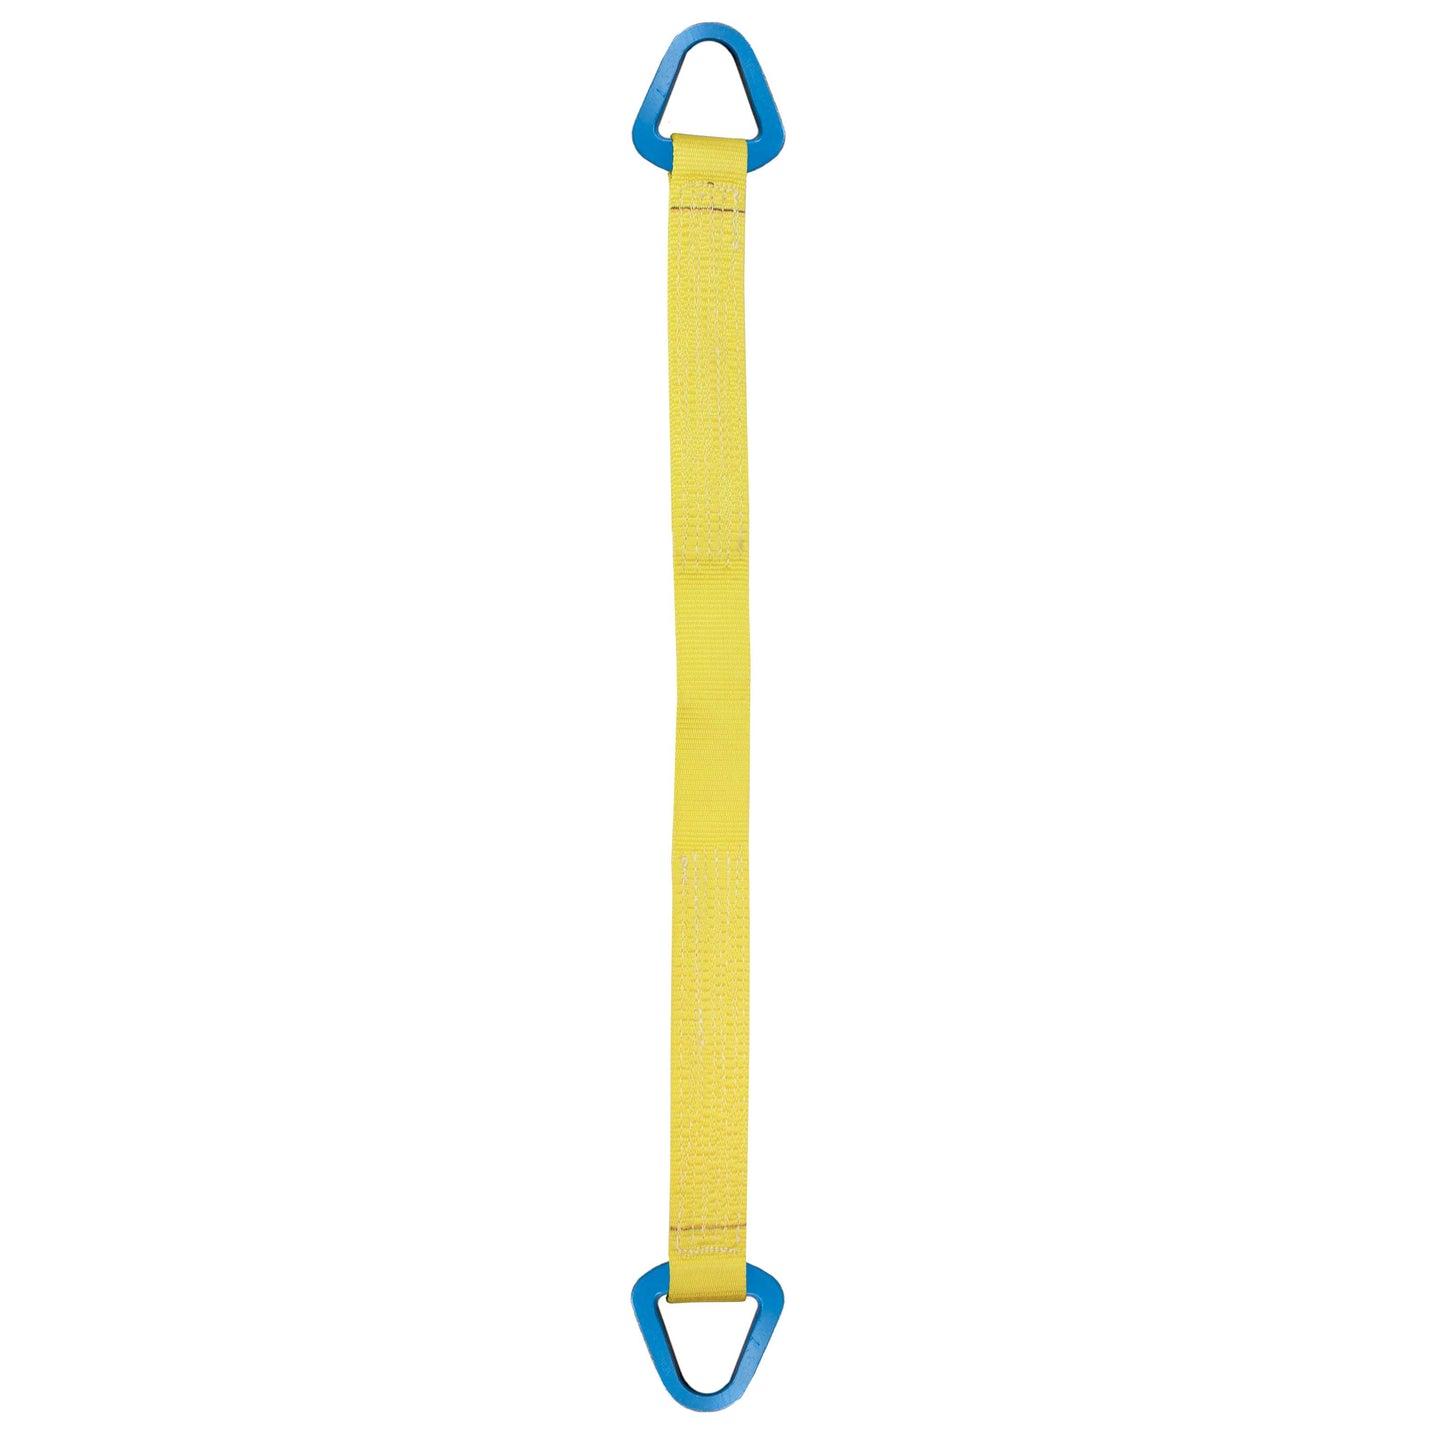 Nylon Lifting Sling Triangle 10 inch x 4 foot 1ply image 1 of 2